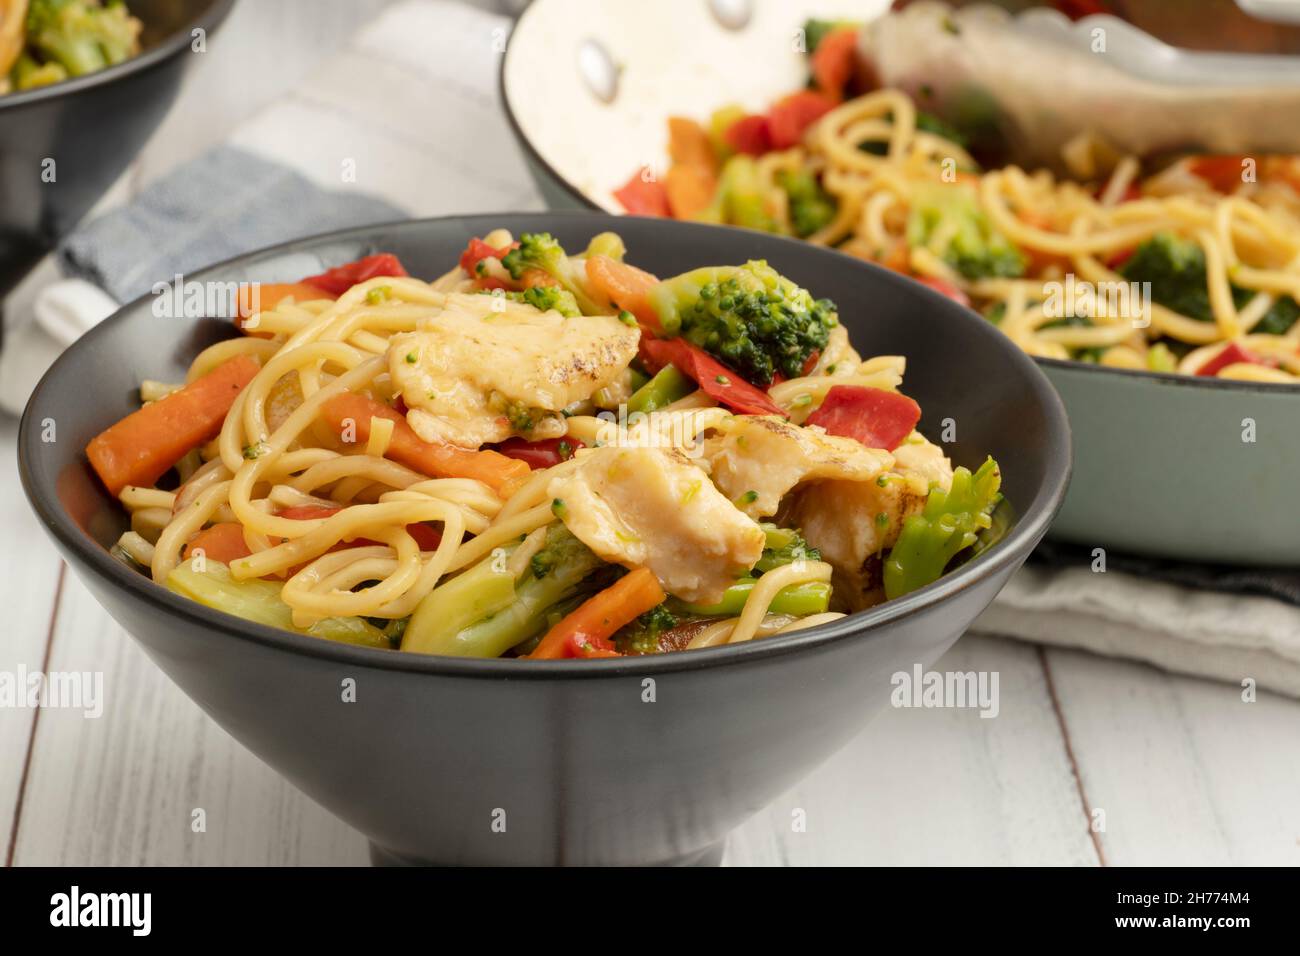 A bowl of chicken chow mein with broccoli, carrots, and peppers Stock Photo